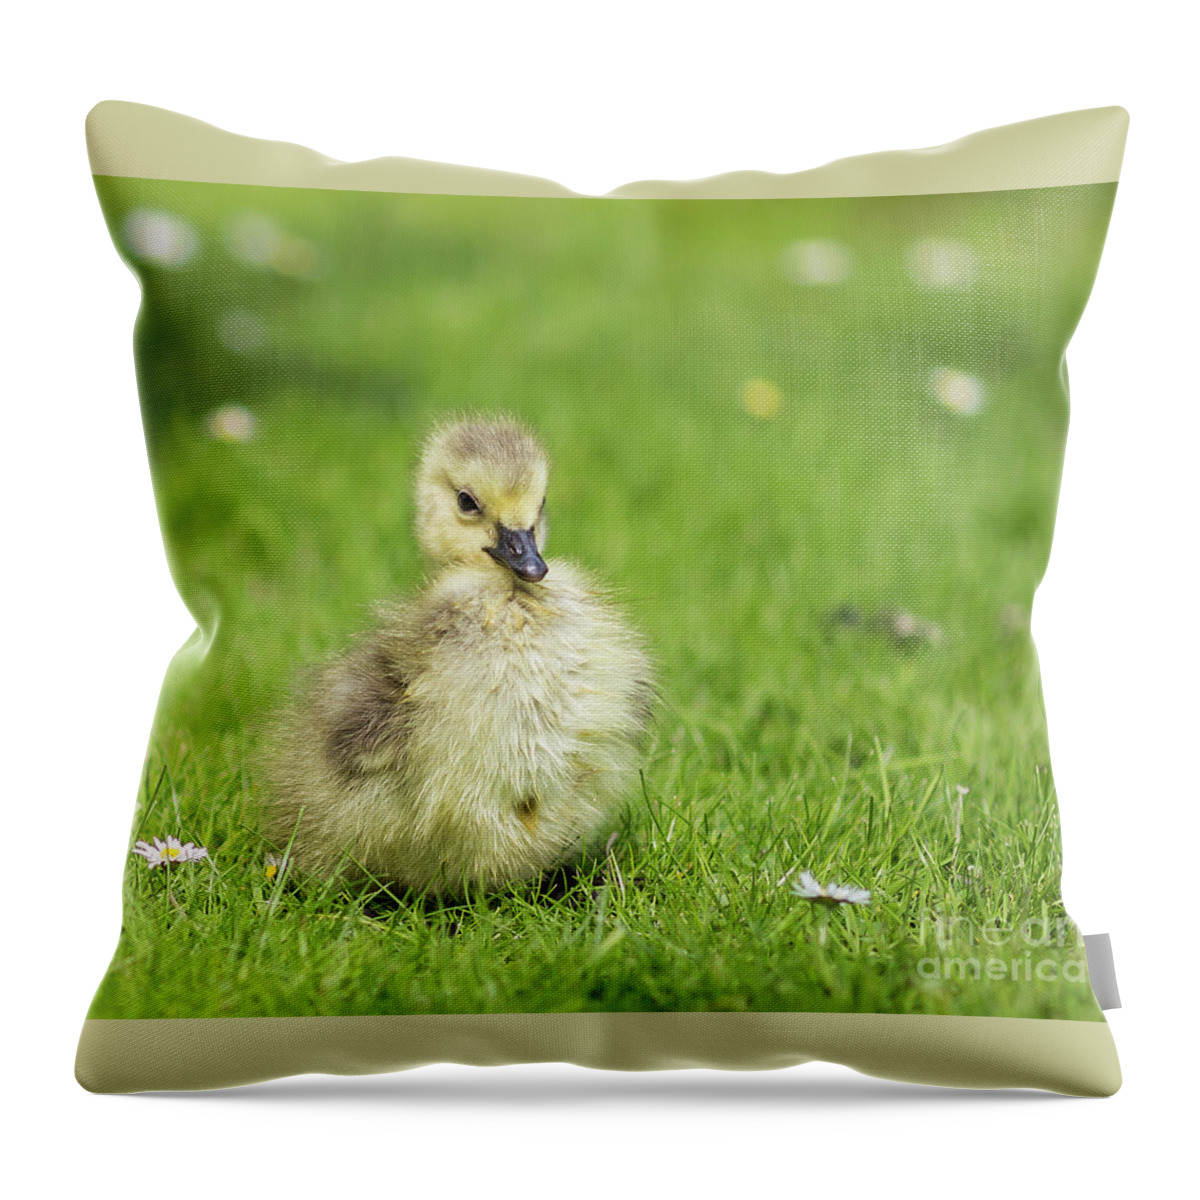 Gosling Throw Pillow featuring the photograph Gosling by Eva Lechner